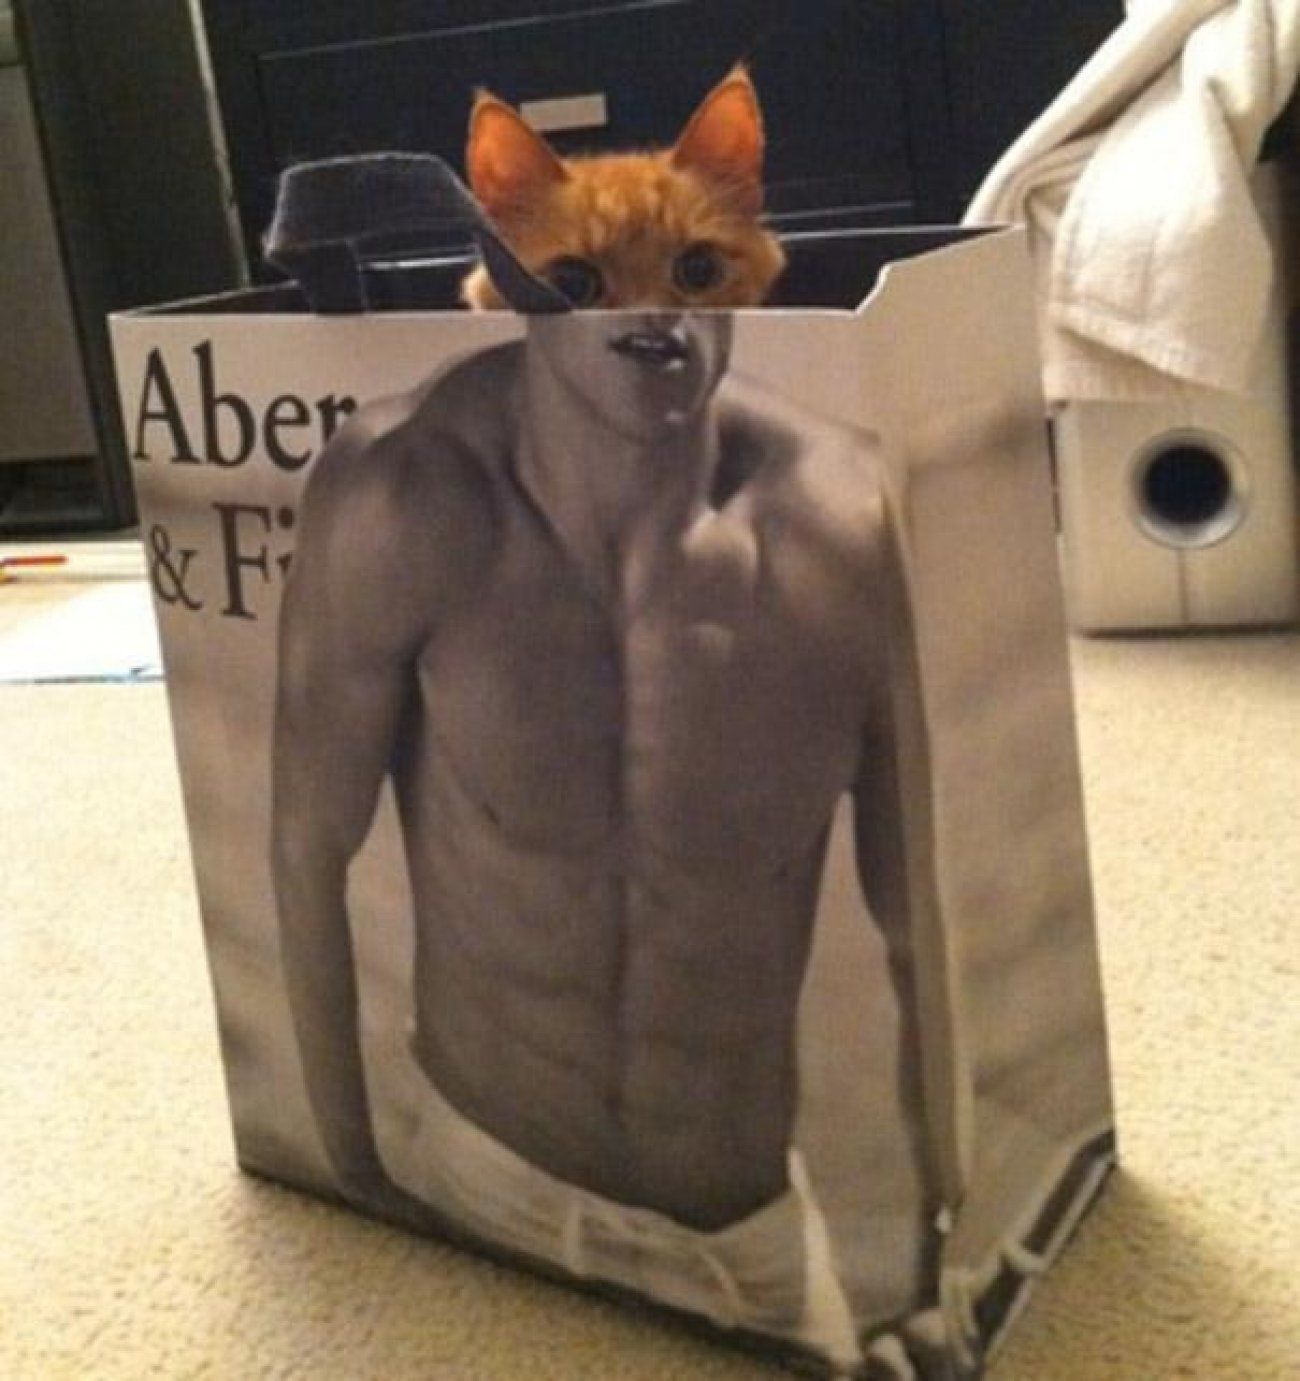 The upcoming face of Abercrombie & Fitch.